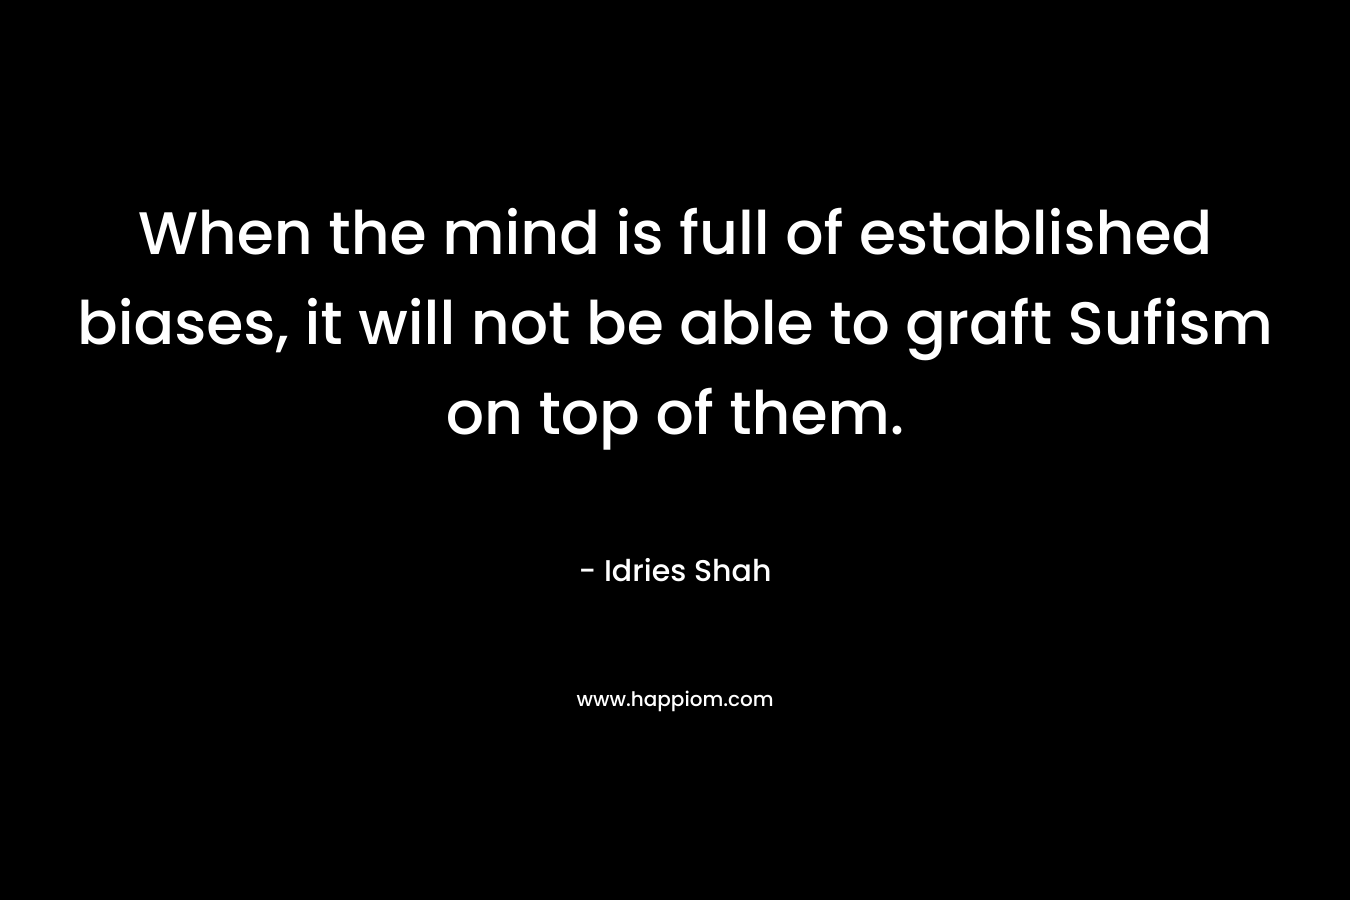 When the mind is full of established biases, it will not be able to graft Sufism on top of them. – Idries Shah